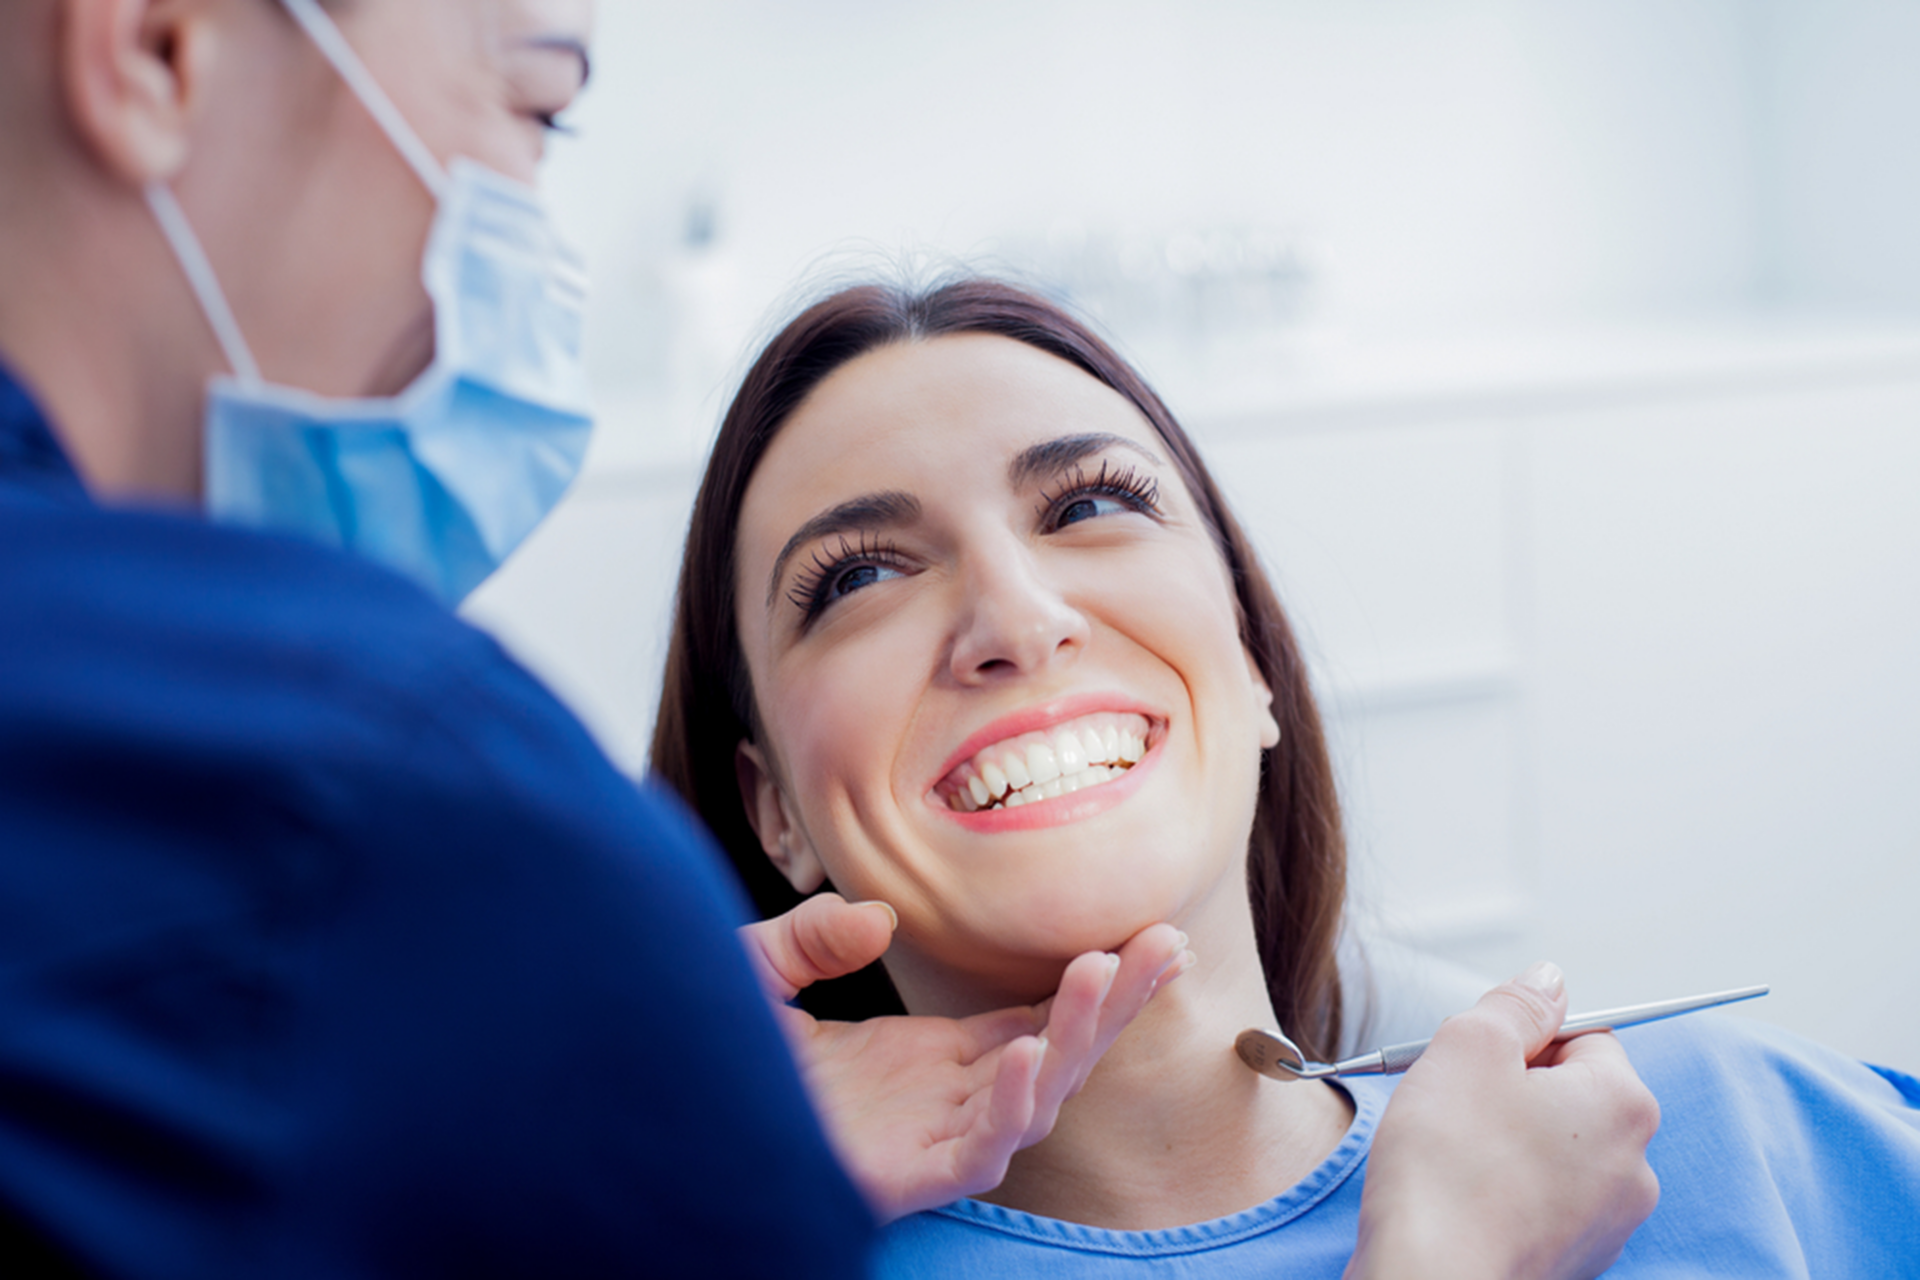 does teeth cleaning remove cavities